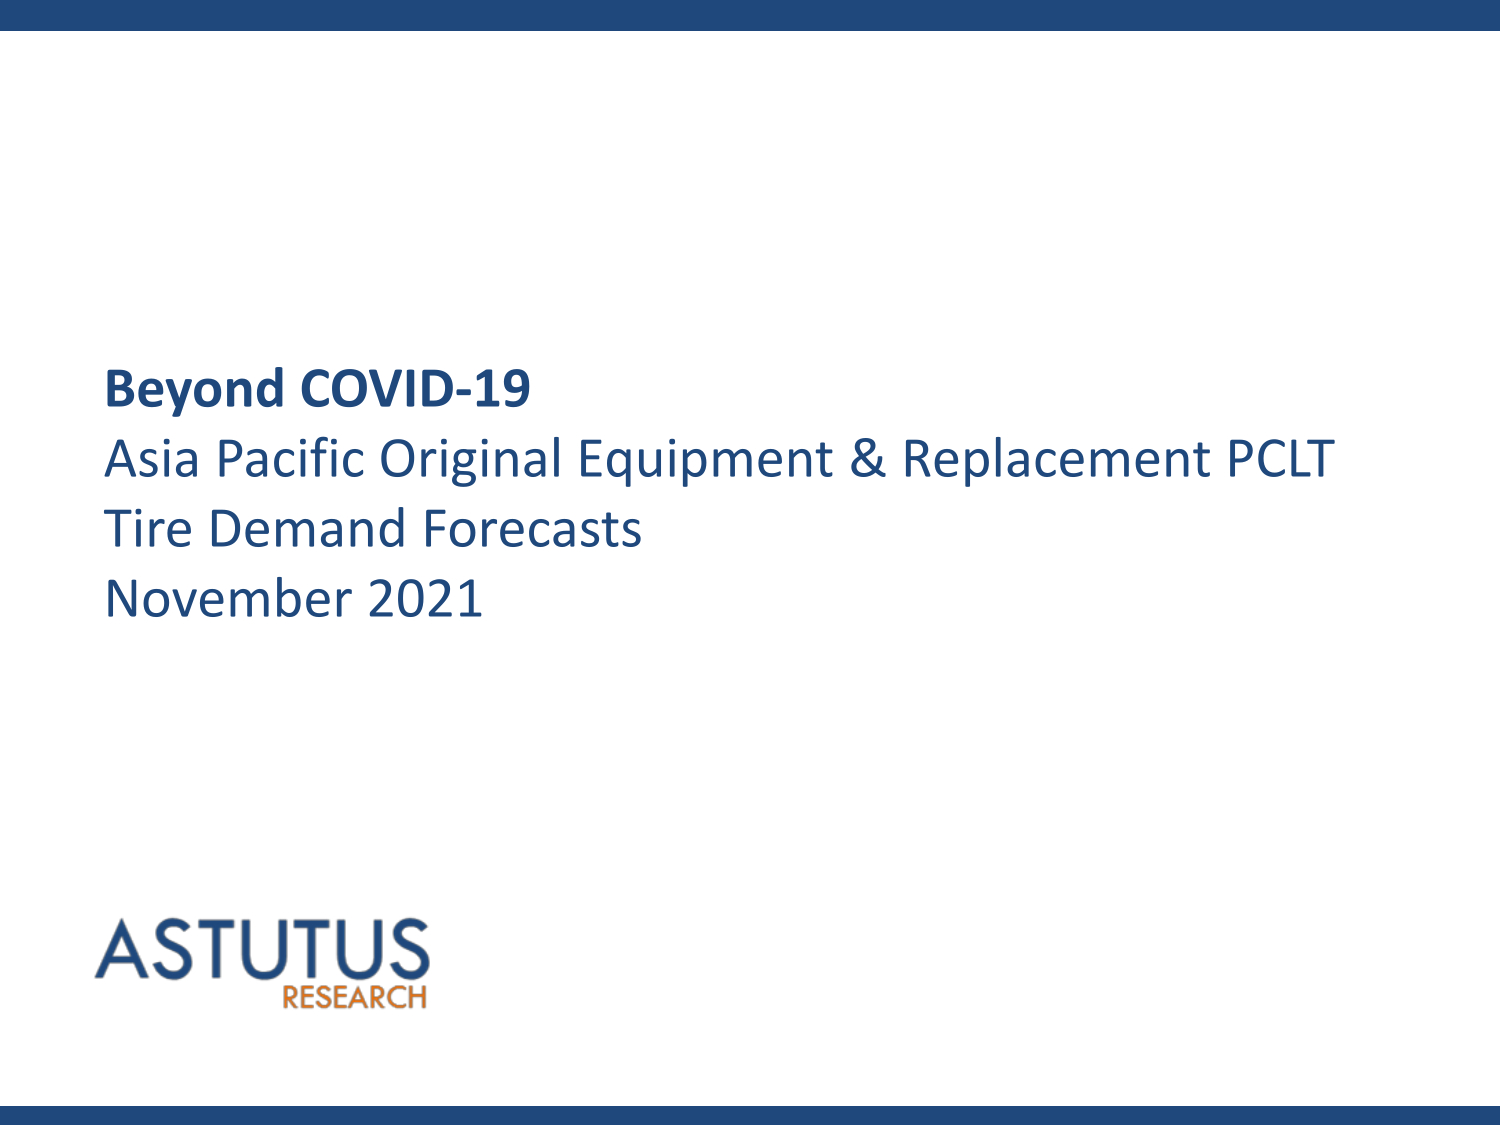 Beyond Covid-19 – Asia Pacific Original Equipment & Replacement PCLT Tire Market Forecasts to 2025